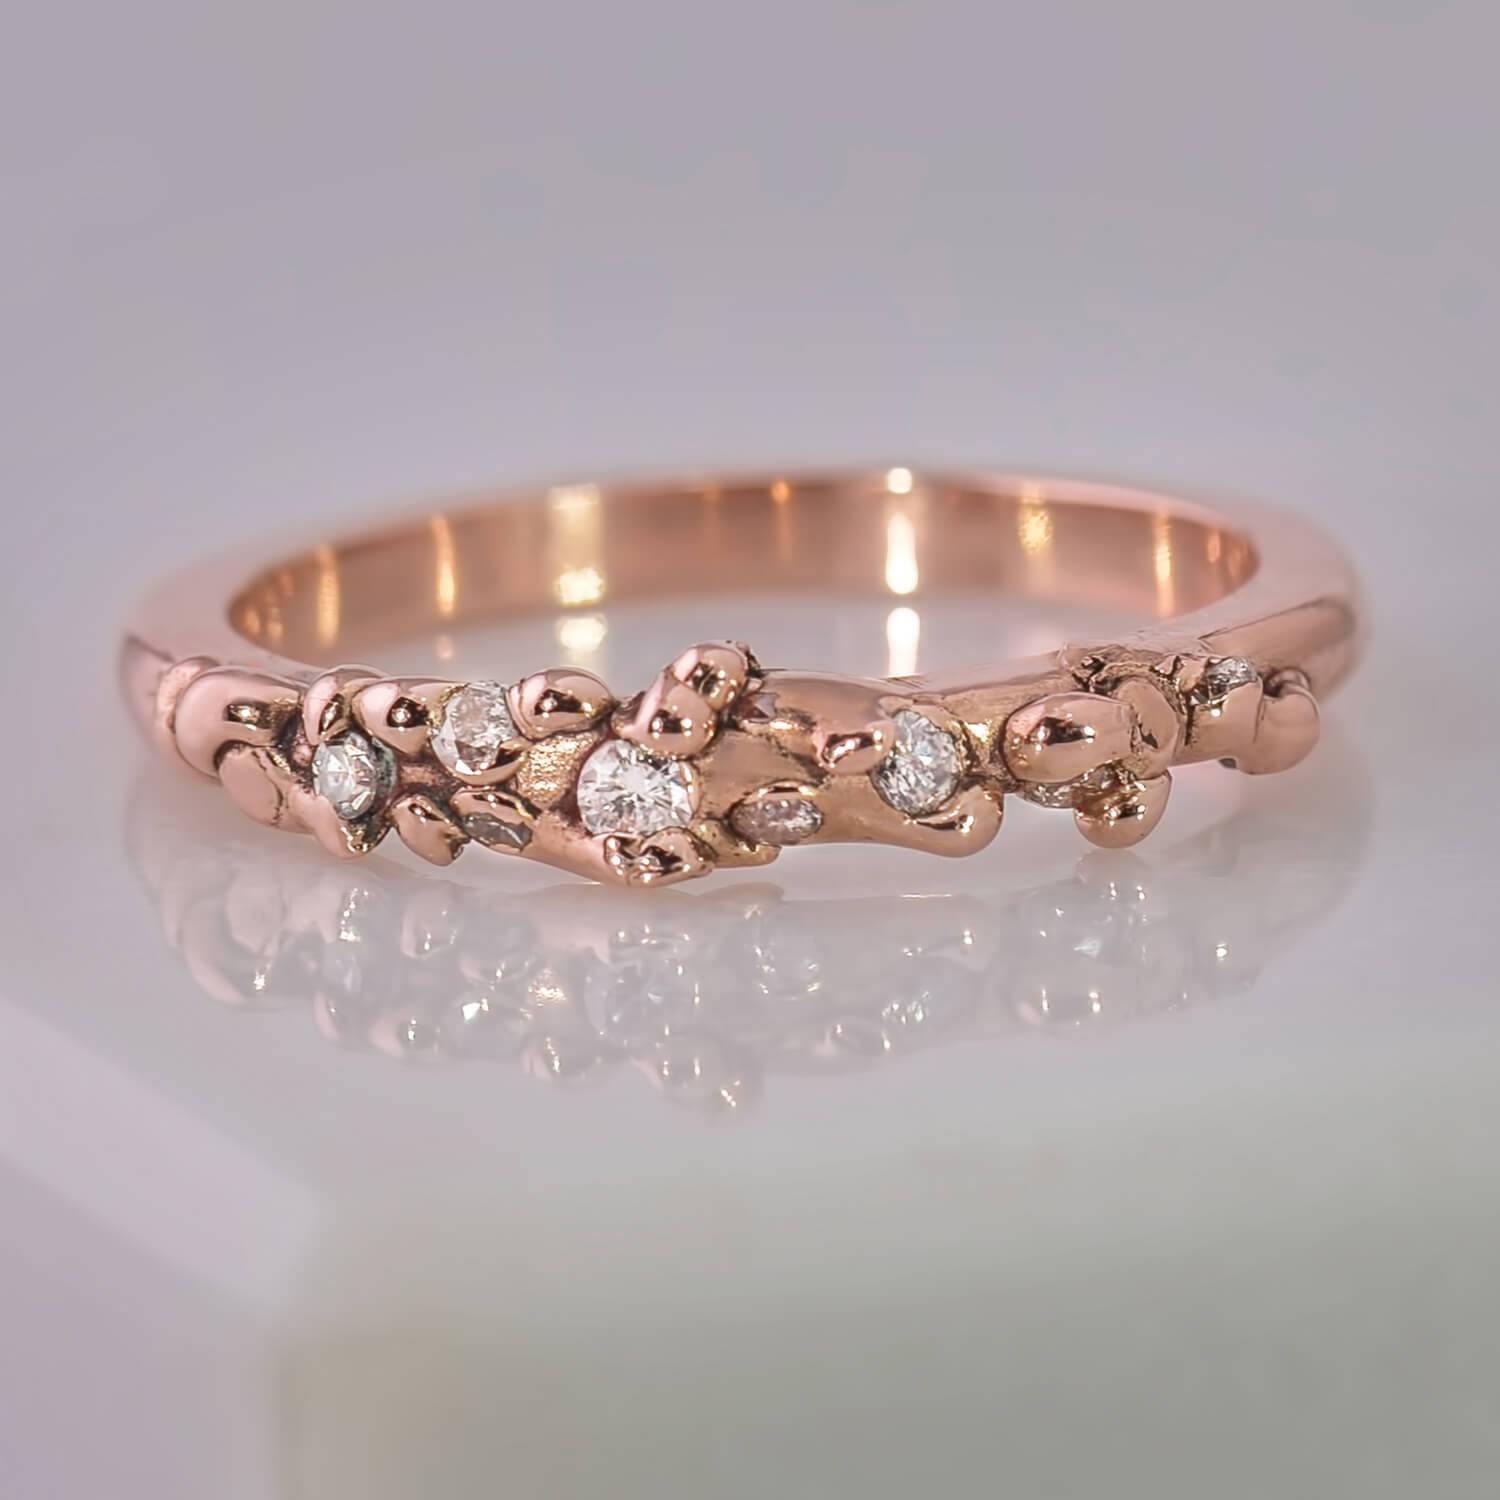 14 karat recycled rose gold with 9 recycled natural colourless diamonds with a total weight of 0.14 carats. The surface has a globular structure and a high polished lustre